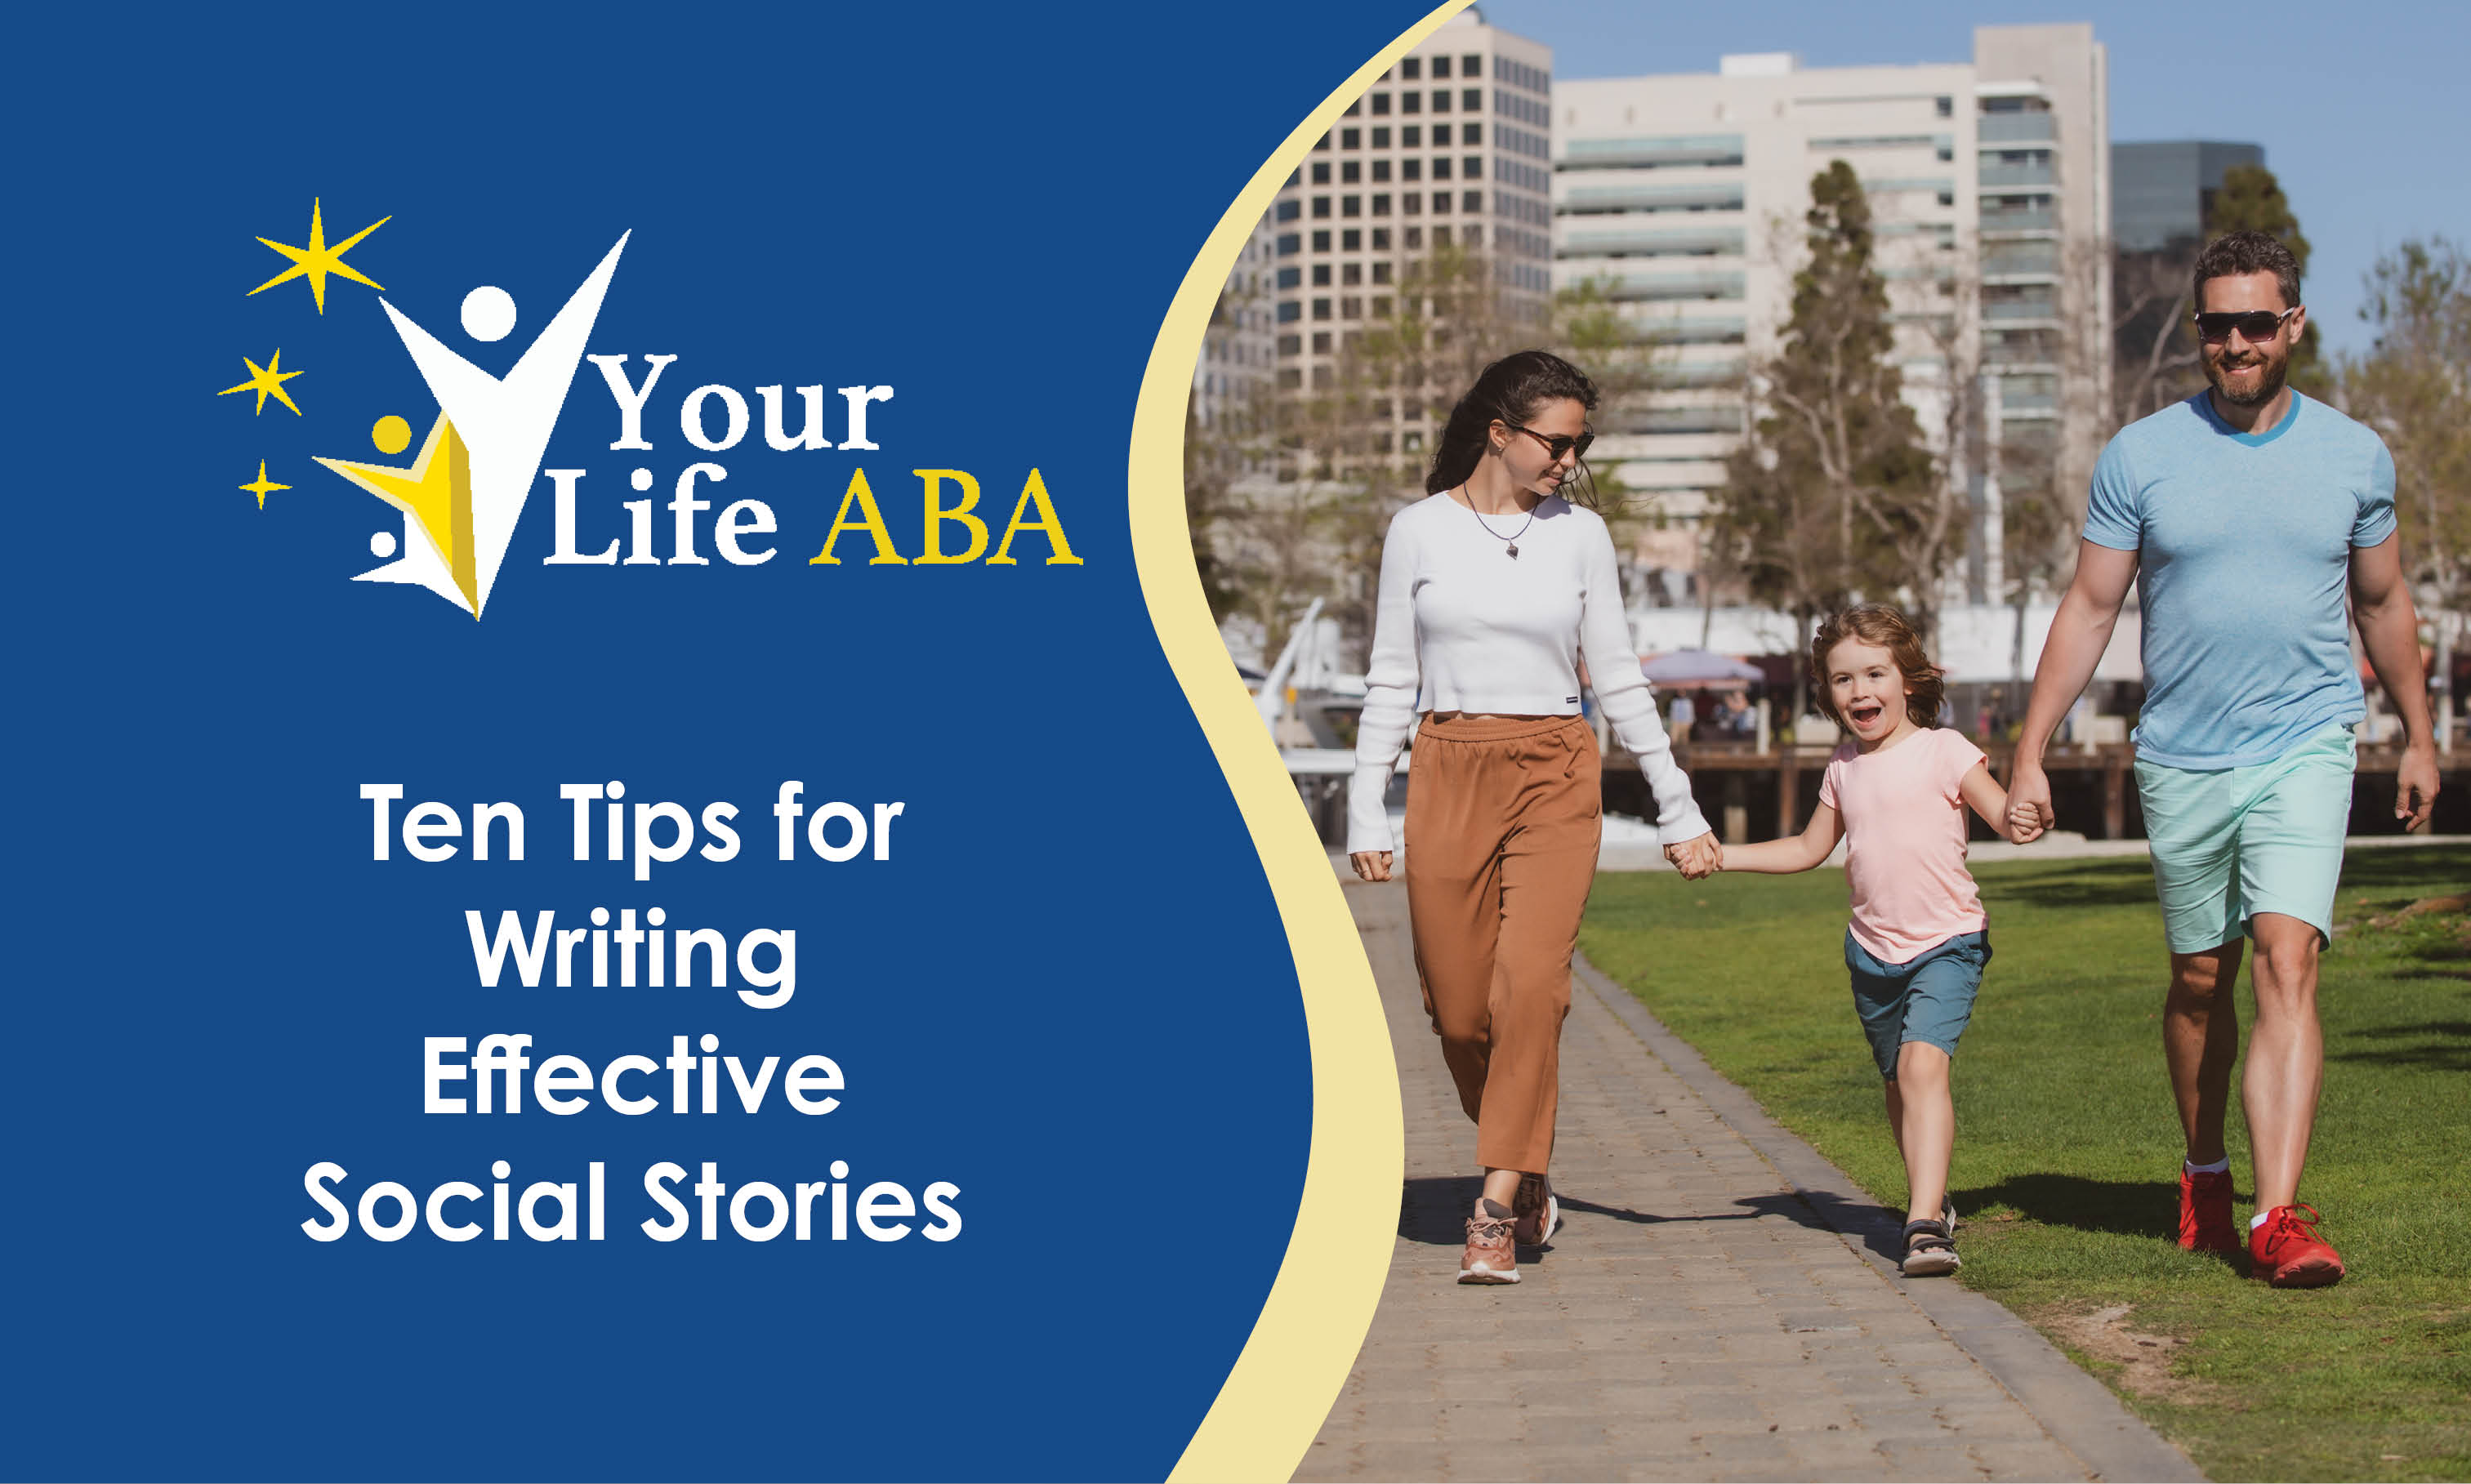 Ten Tips for Writing Effective Social Stories